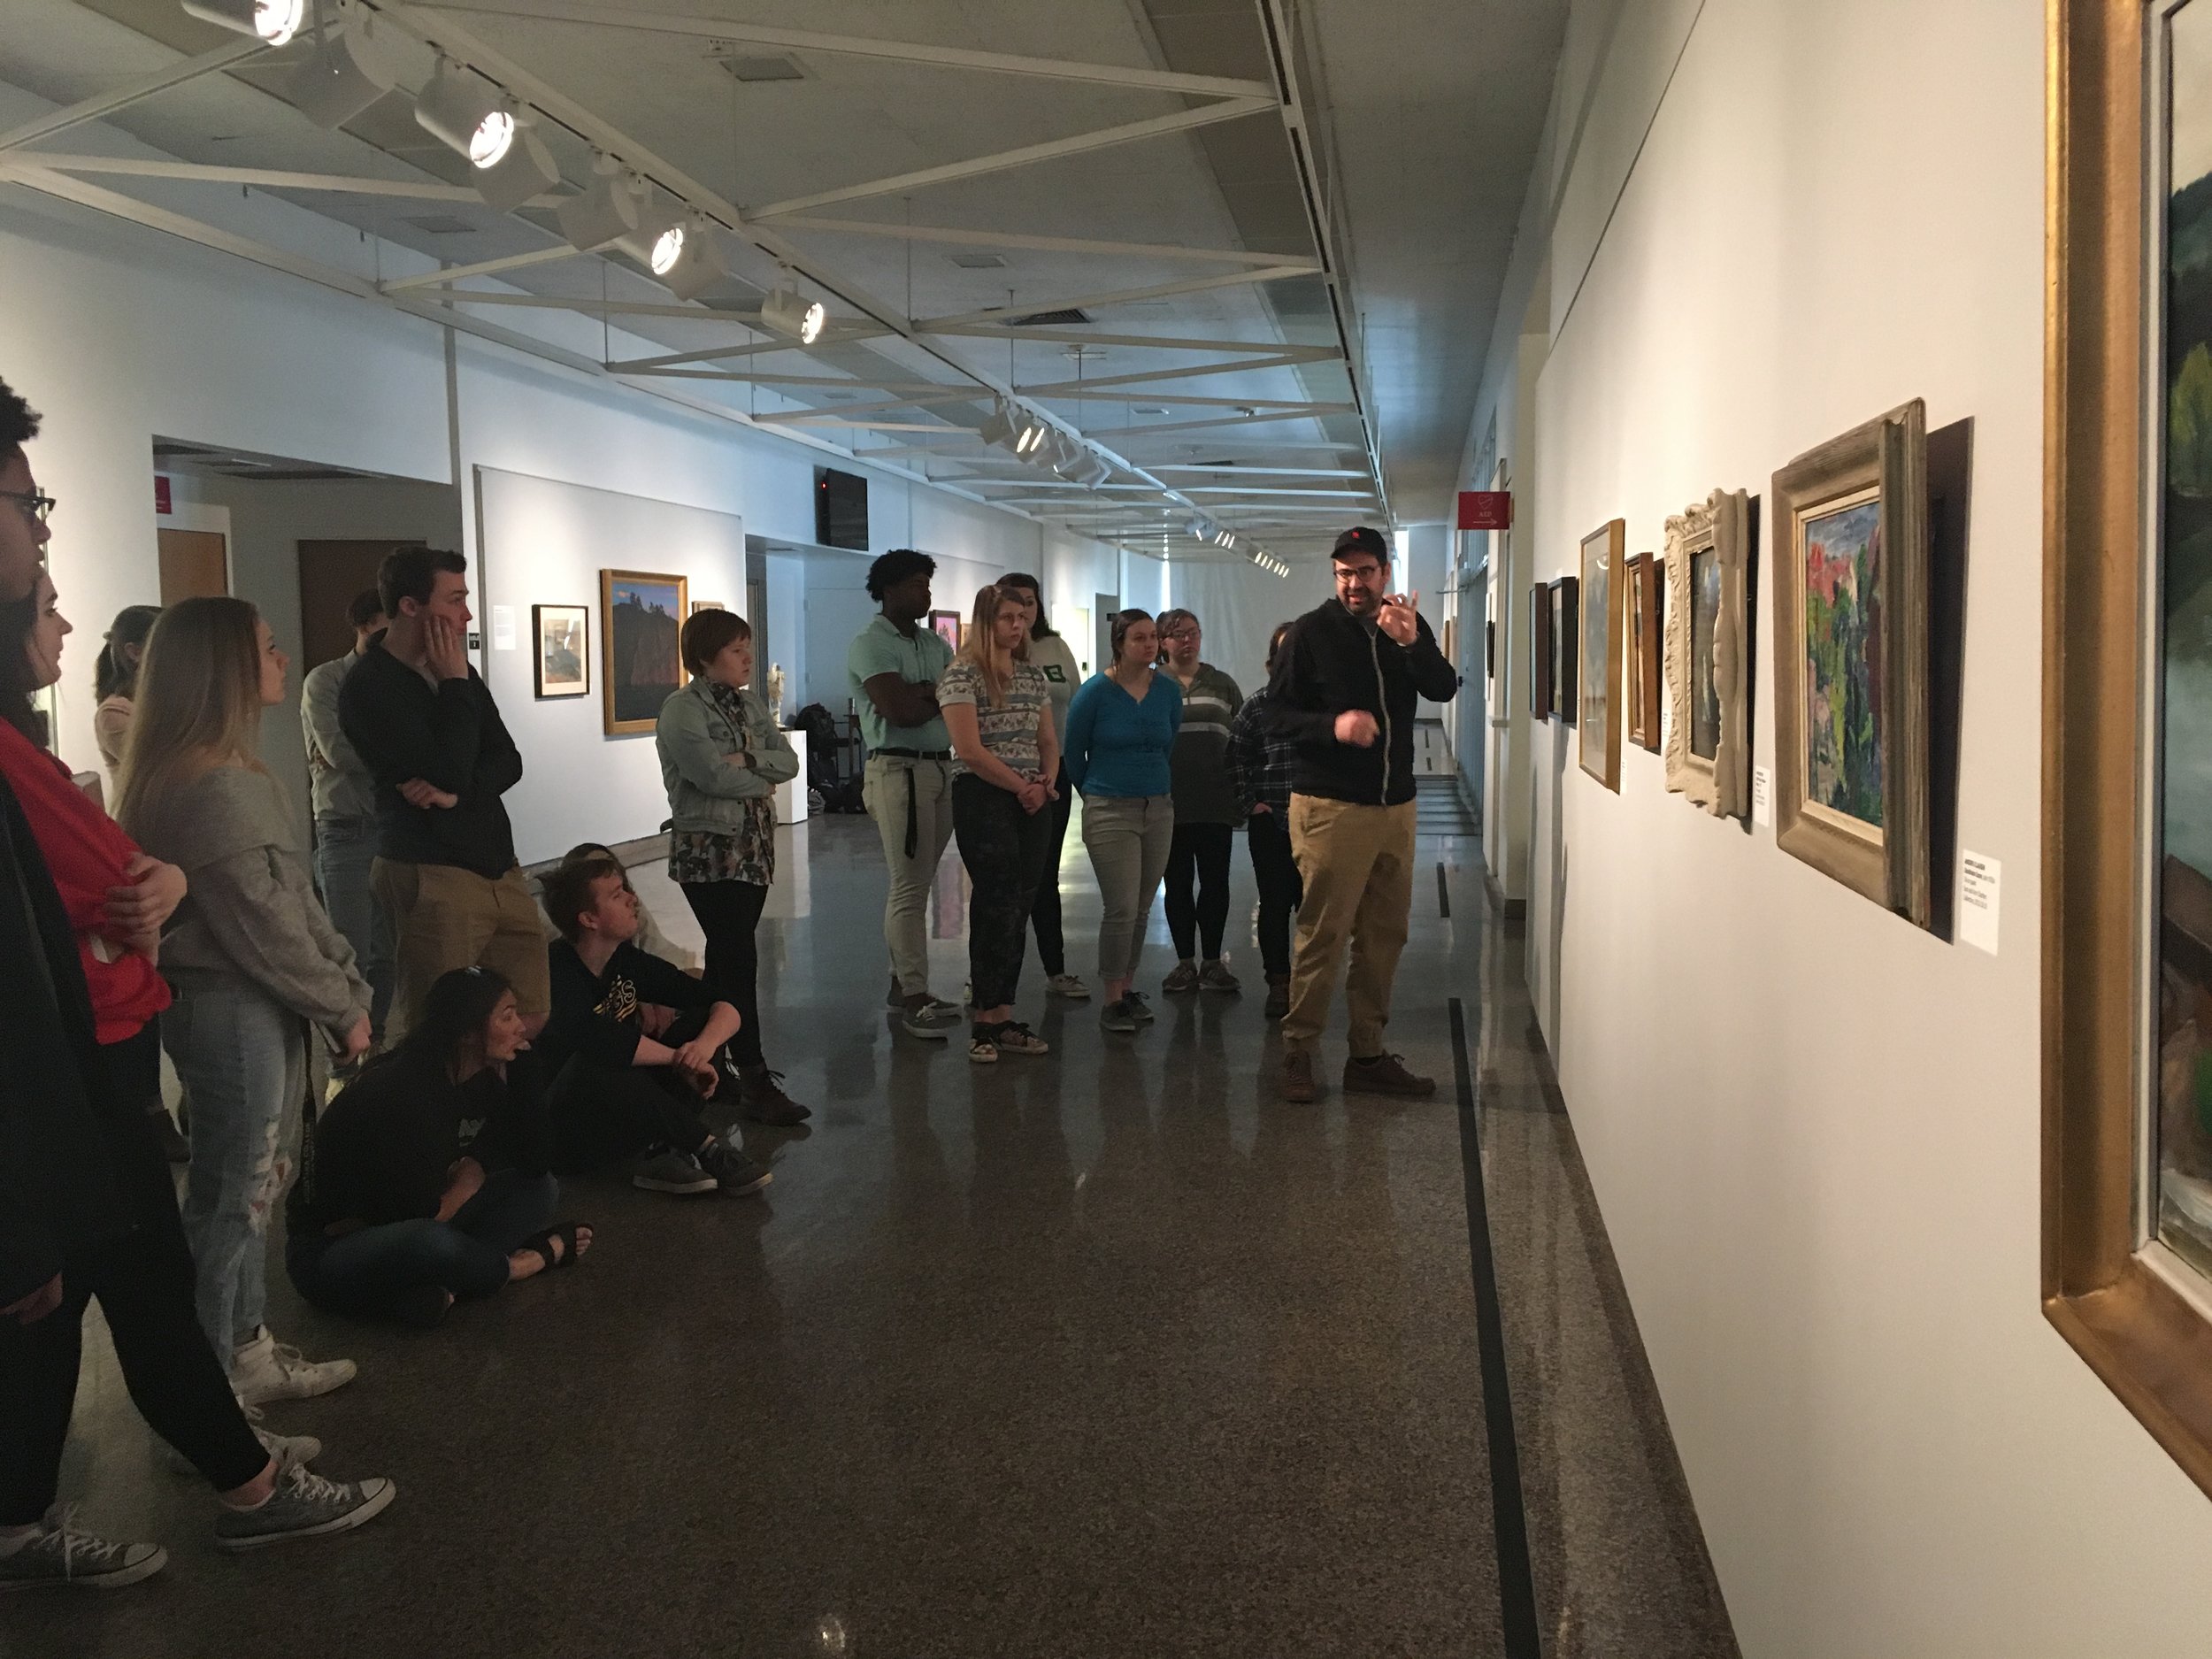  Marcos Valella class visit in galleries with Honors First Year Seminar.  